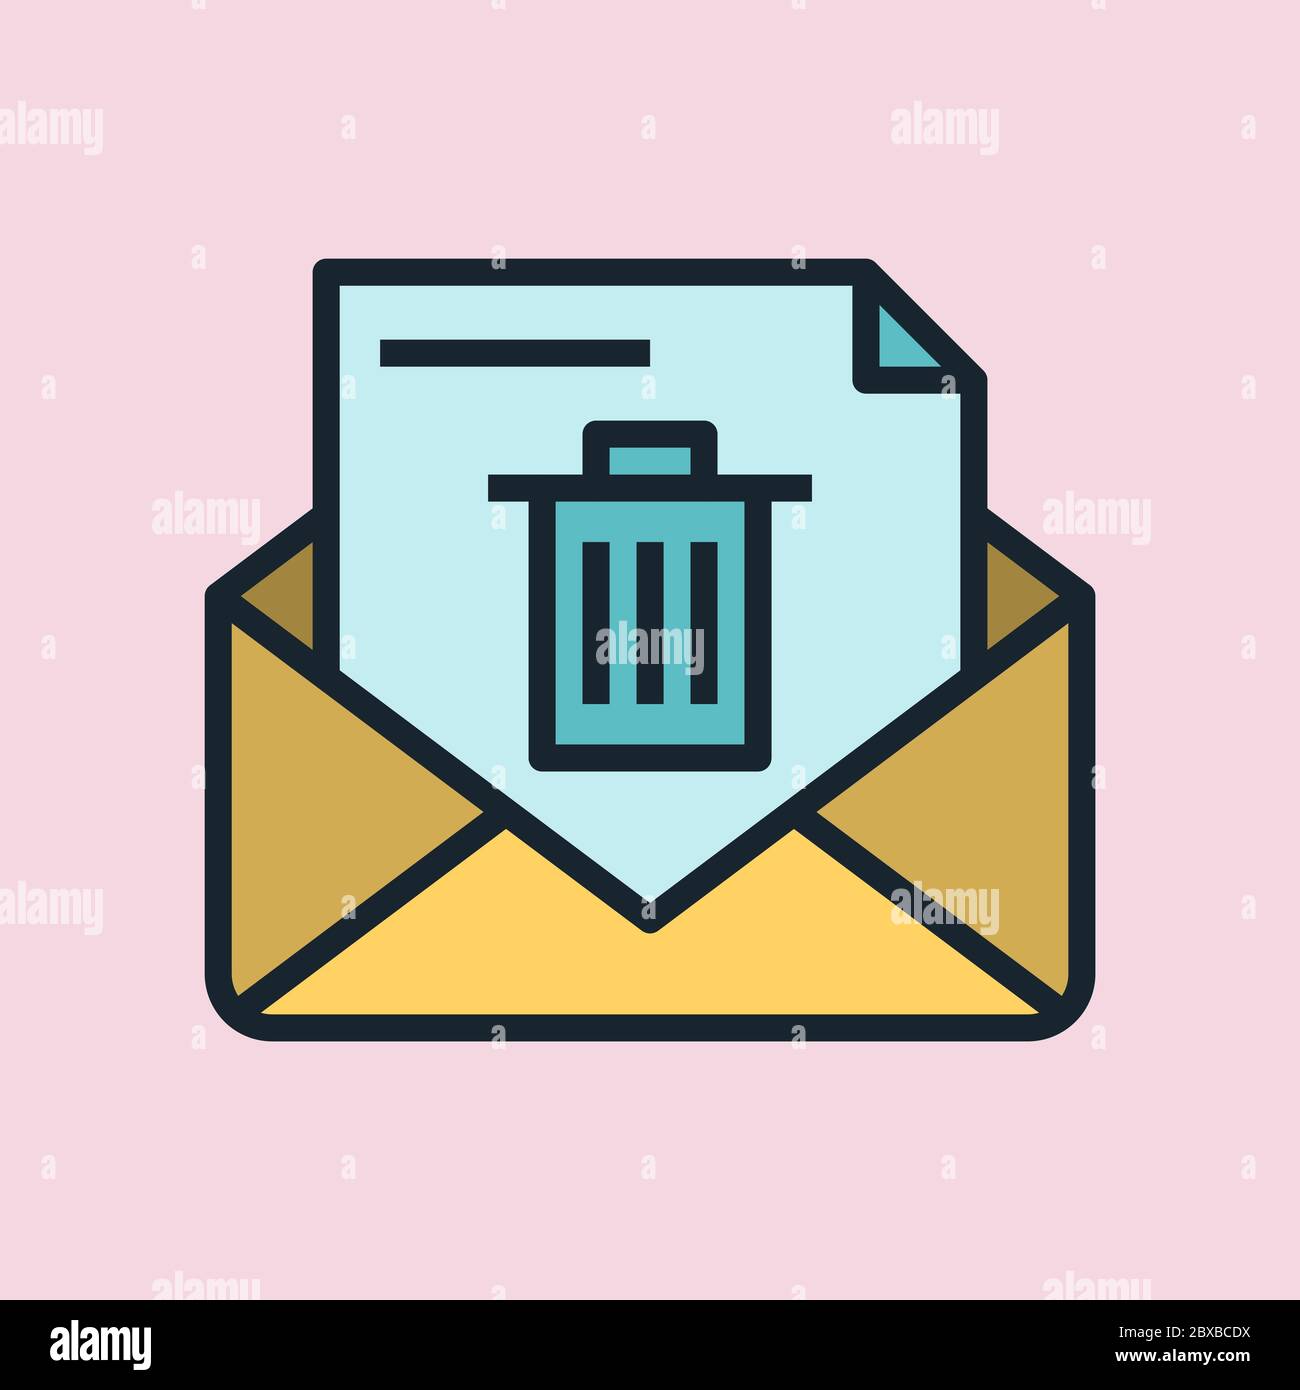 Spam or junk email. Social media concept illustration, flat design linear style banner. Usage for e-mail newsletters, headers, blog posts, print  Stock Vector